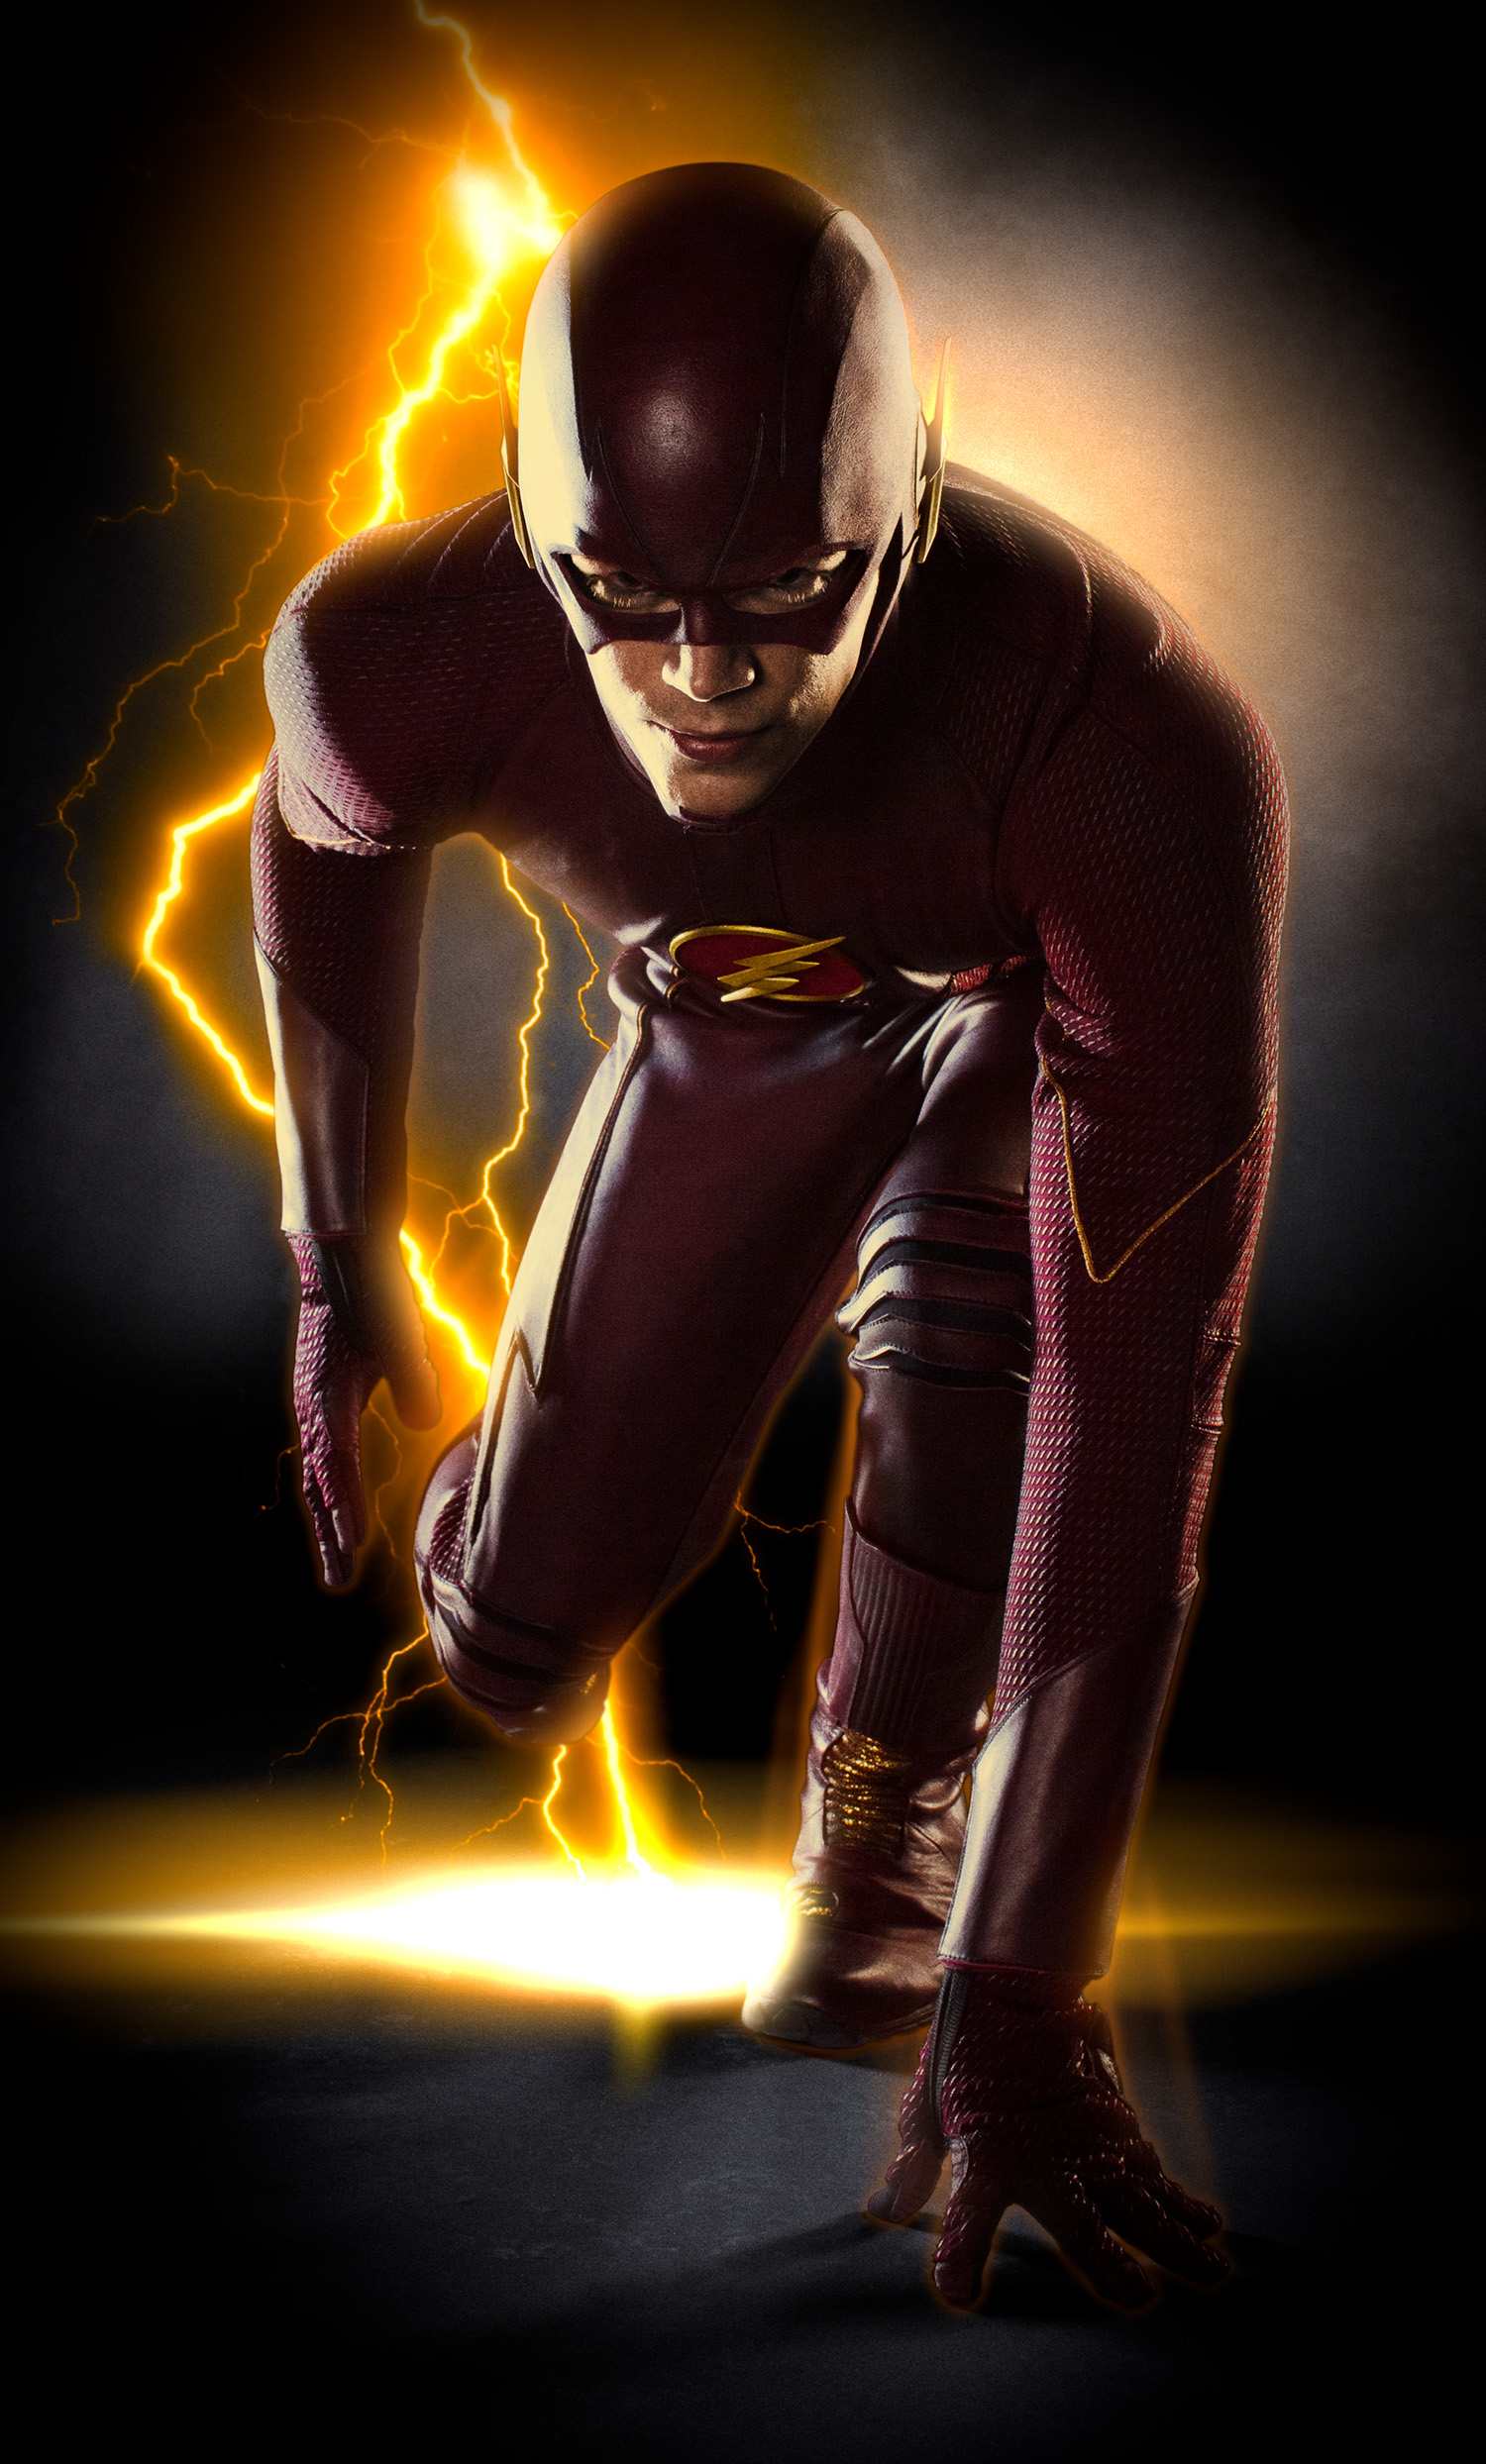 The Flash Full Suit Image Tv Series Official Costume